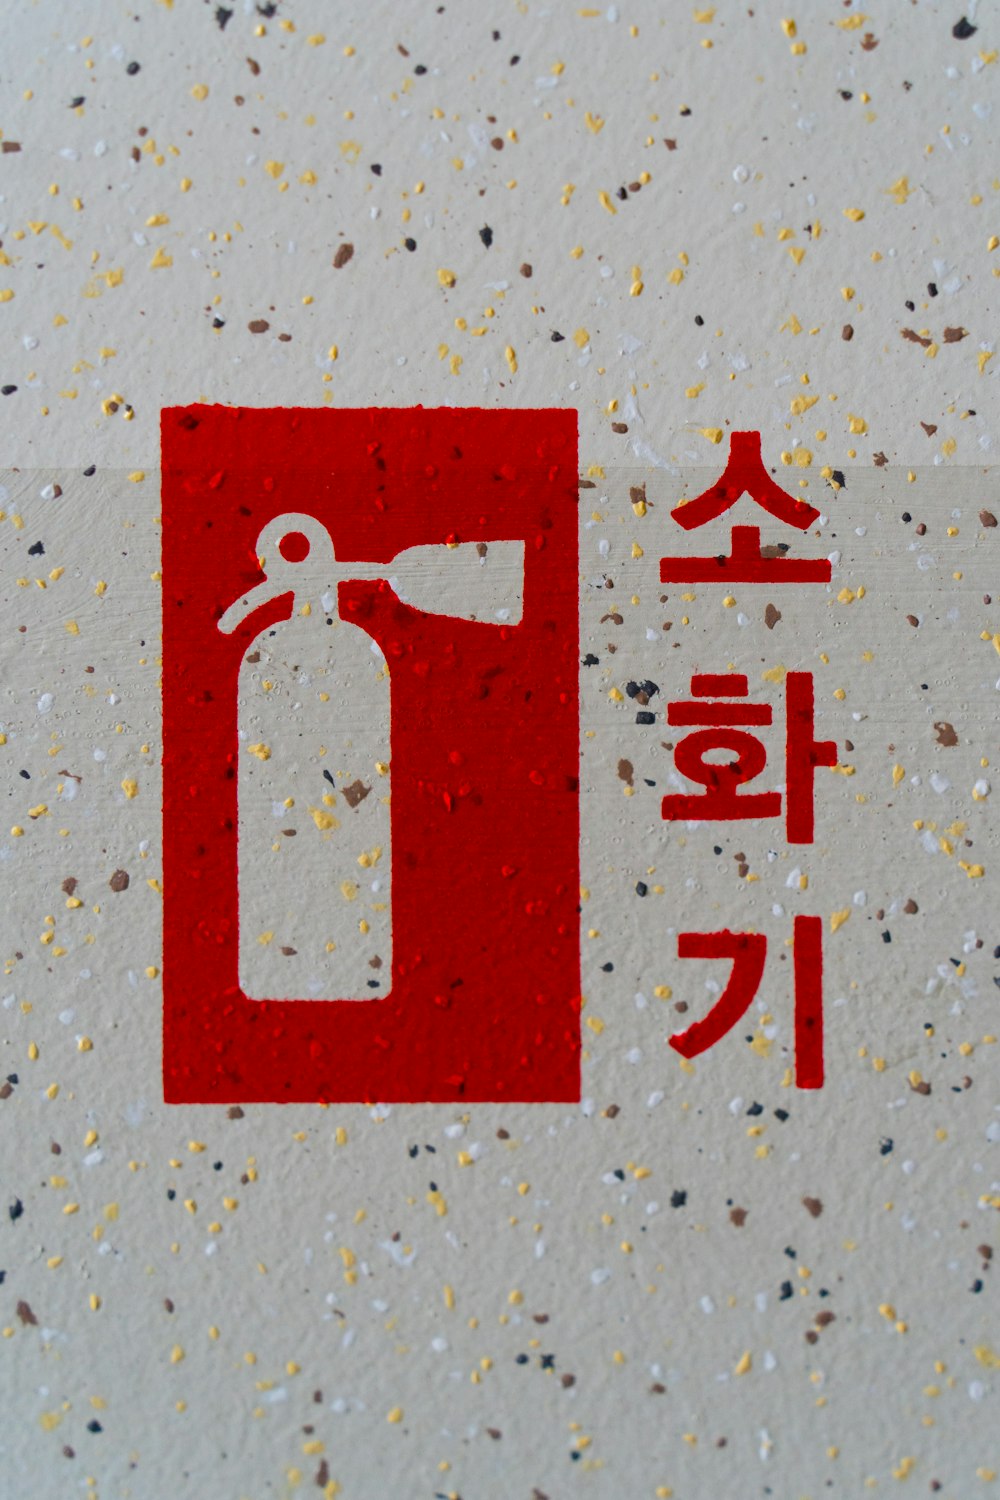 a red and white fire extinguisher on a white surface